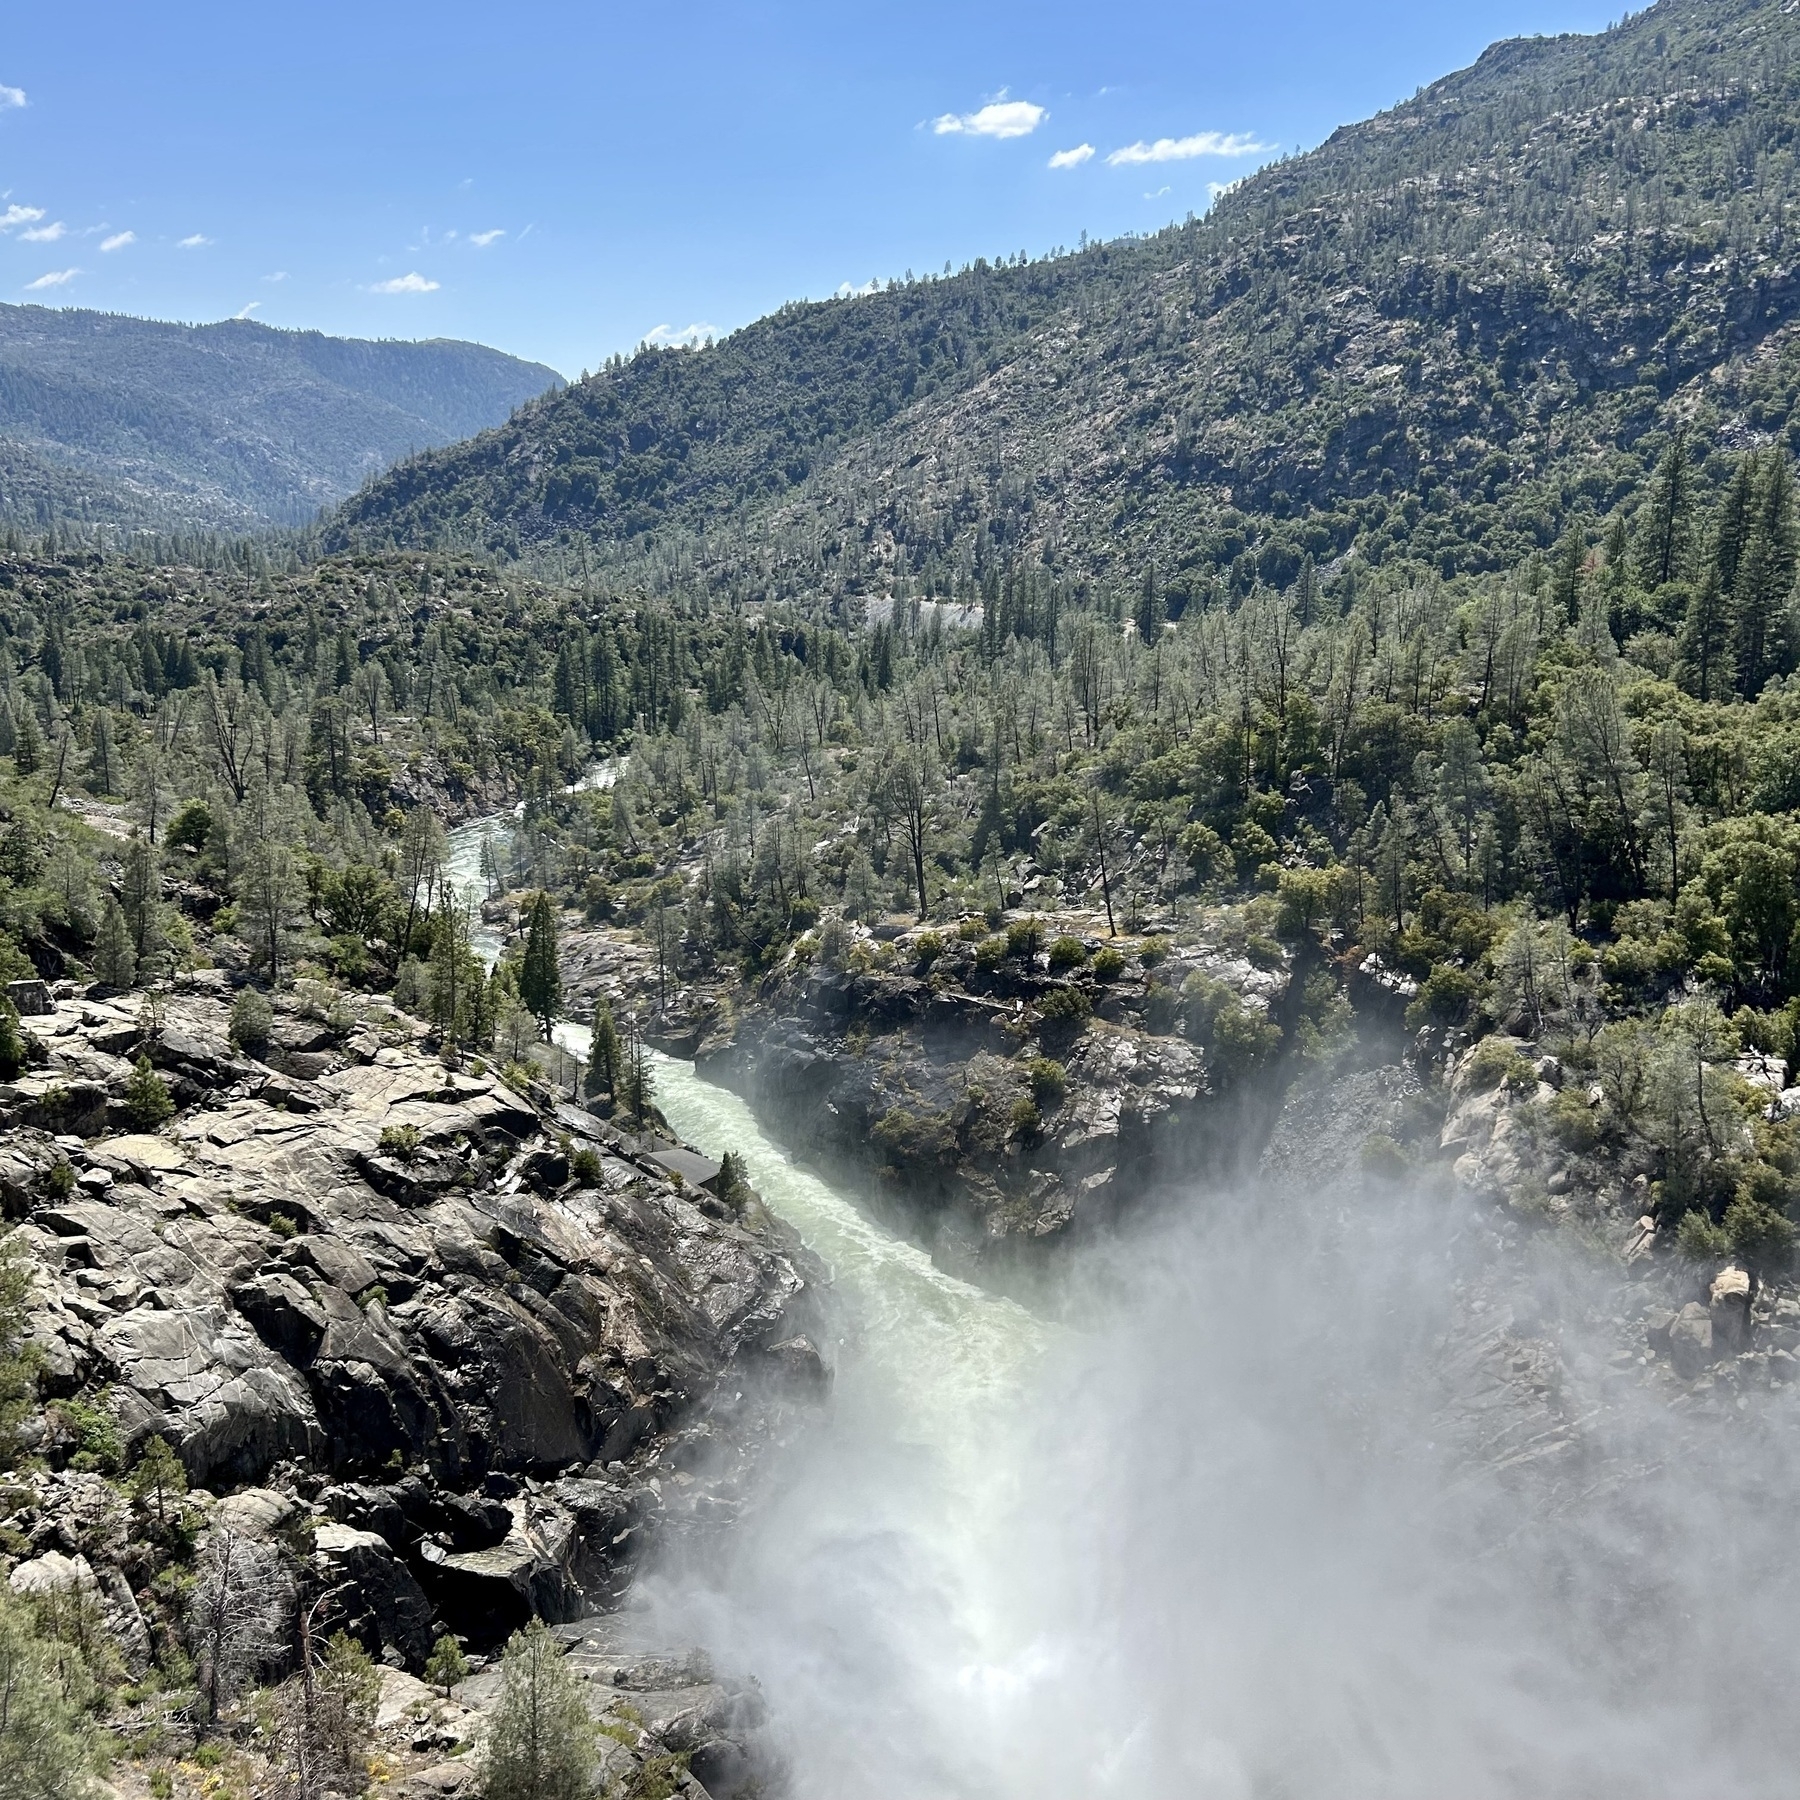 a view of water flowing from the dam at Hetch Hetchy in Yosemite National Park